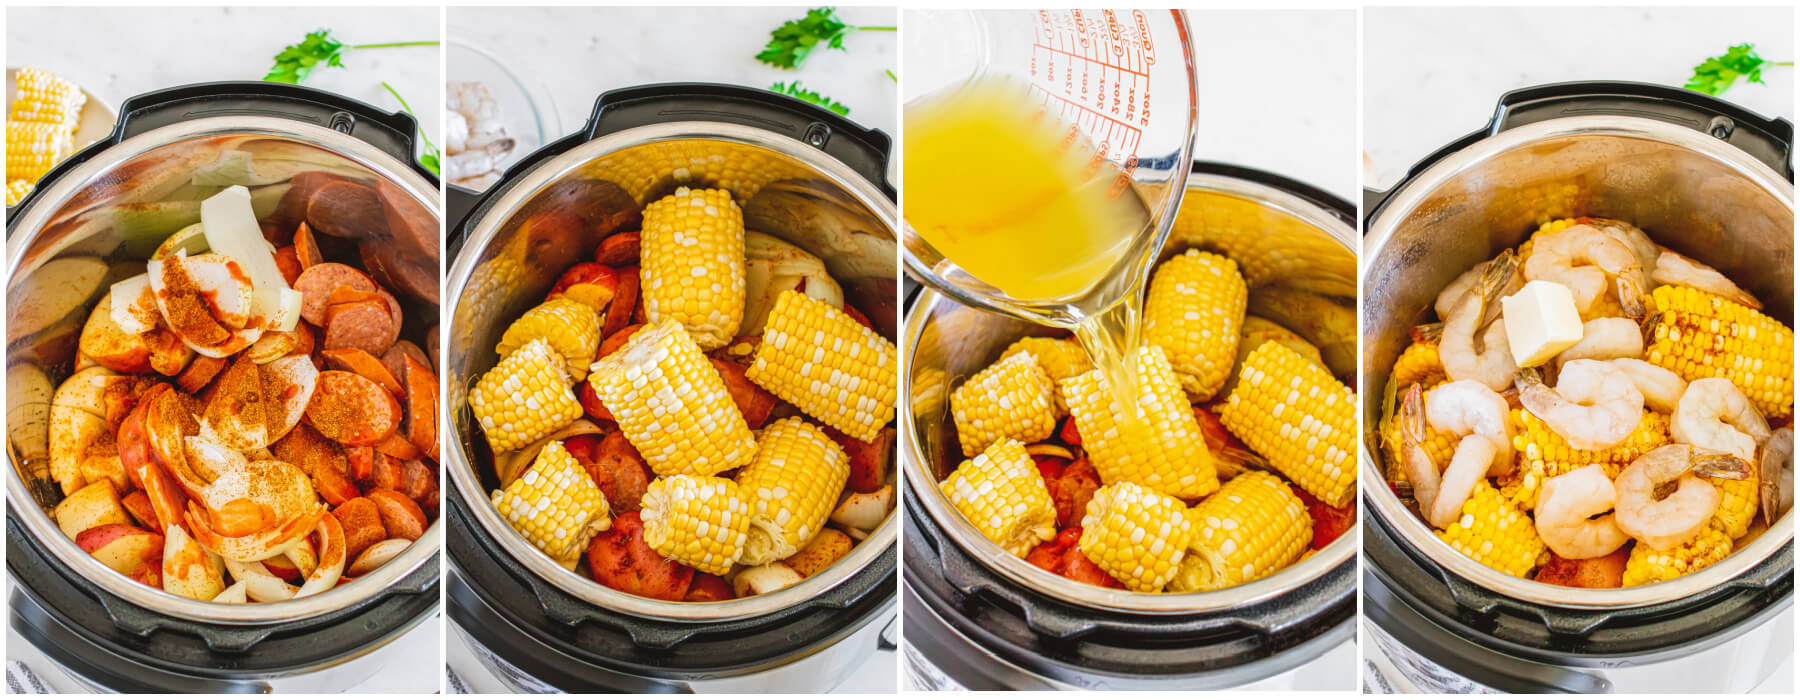 Process images showing the different stages of making an instant pot shrimp boil.